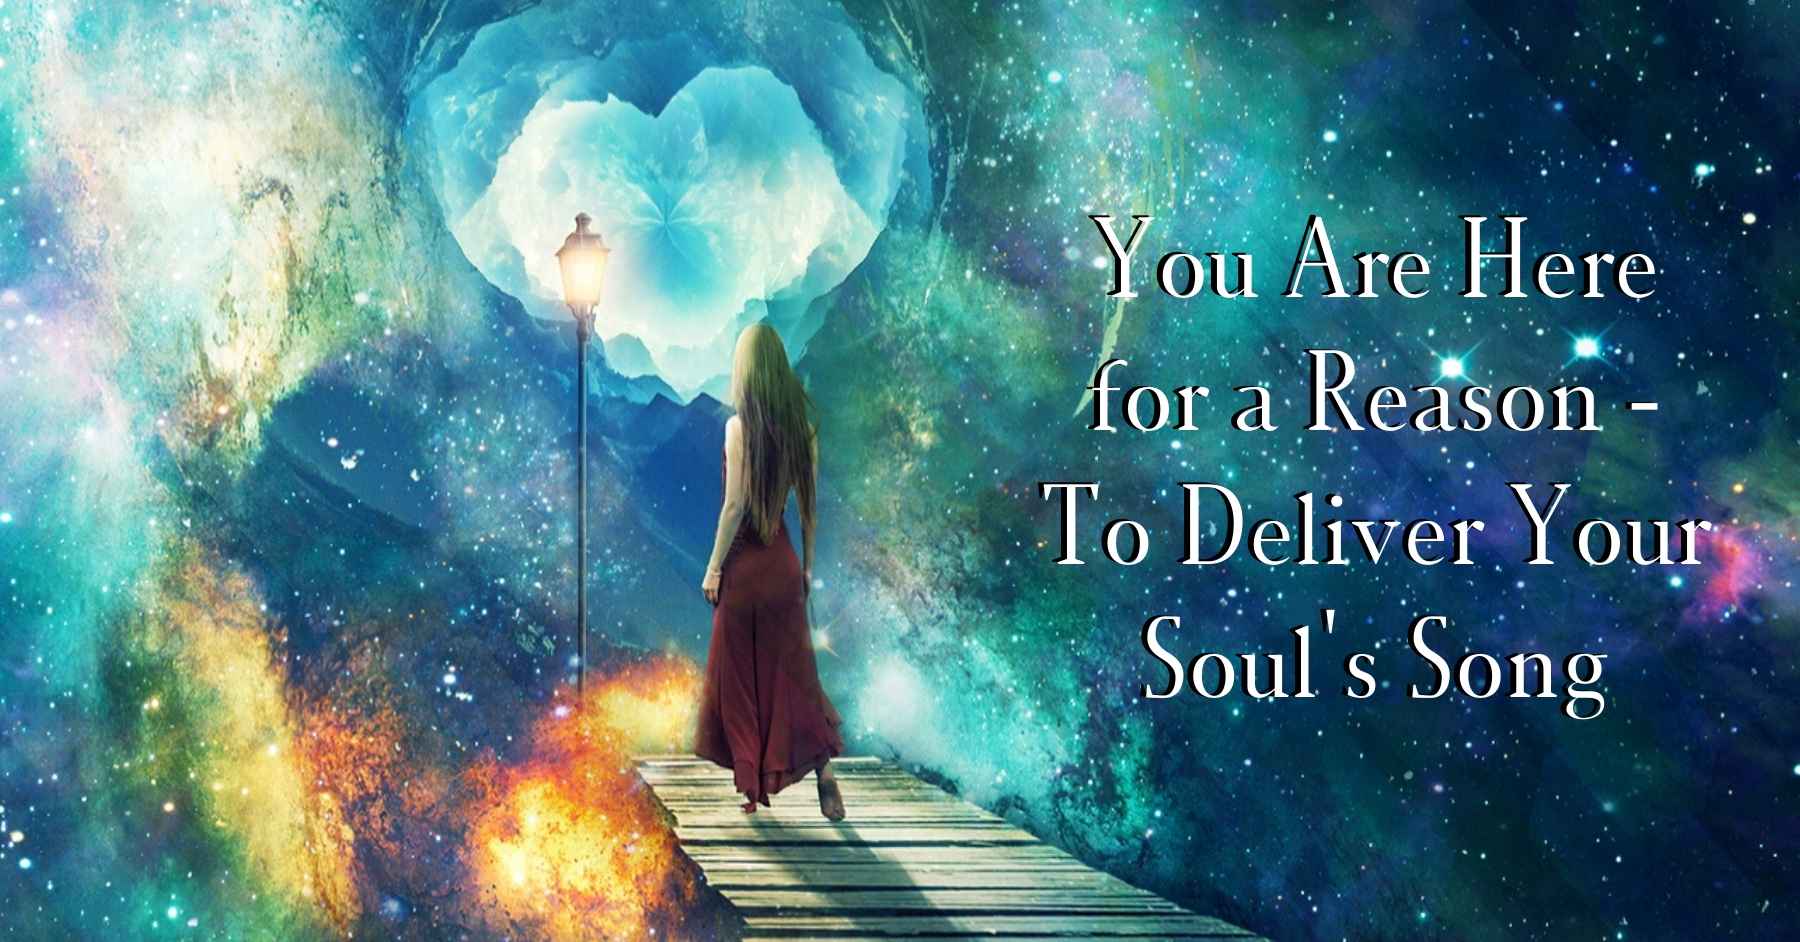 You're Here for a Reason - Deliver Your Soul's Song